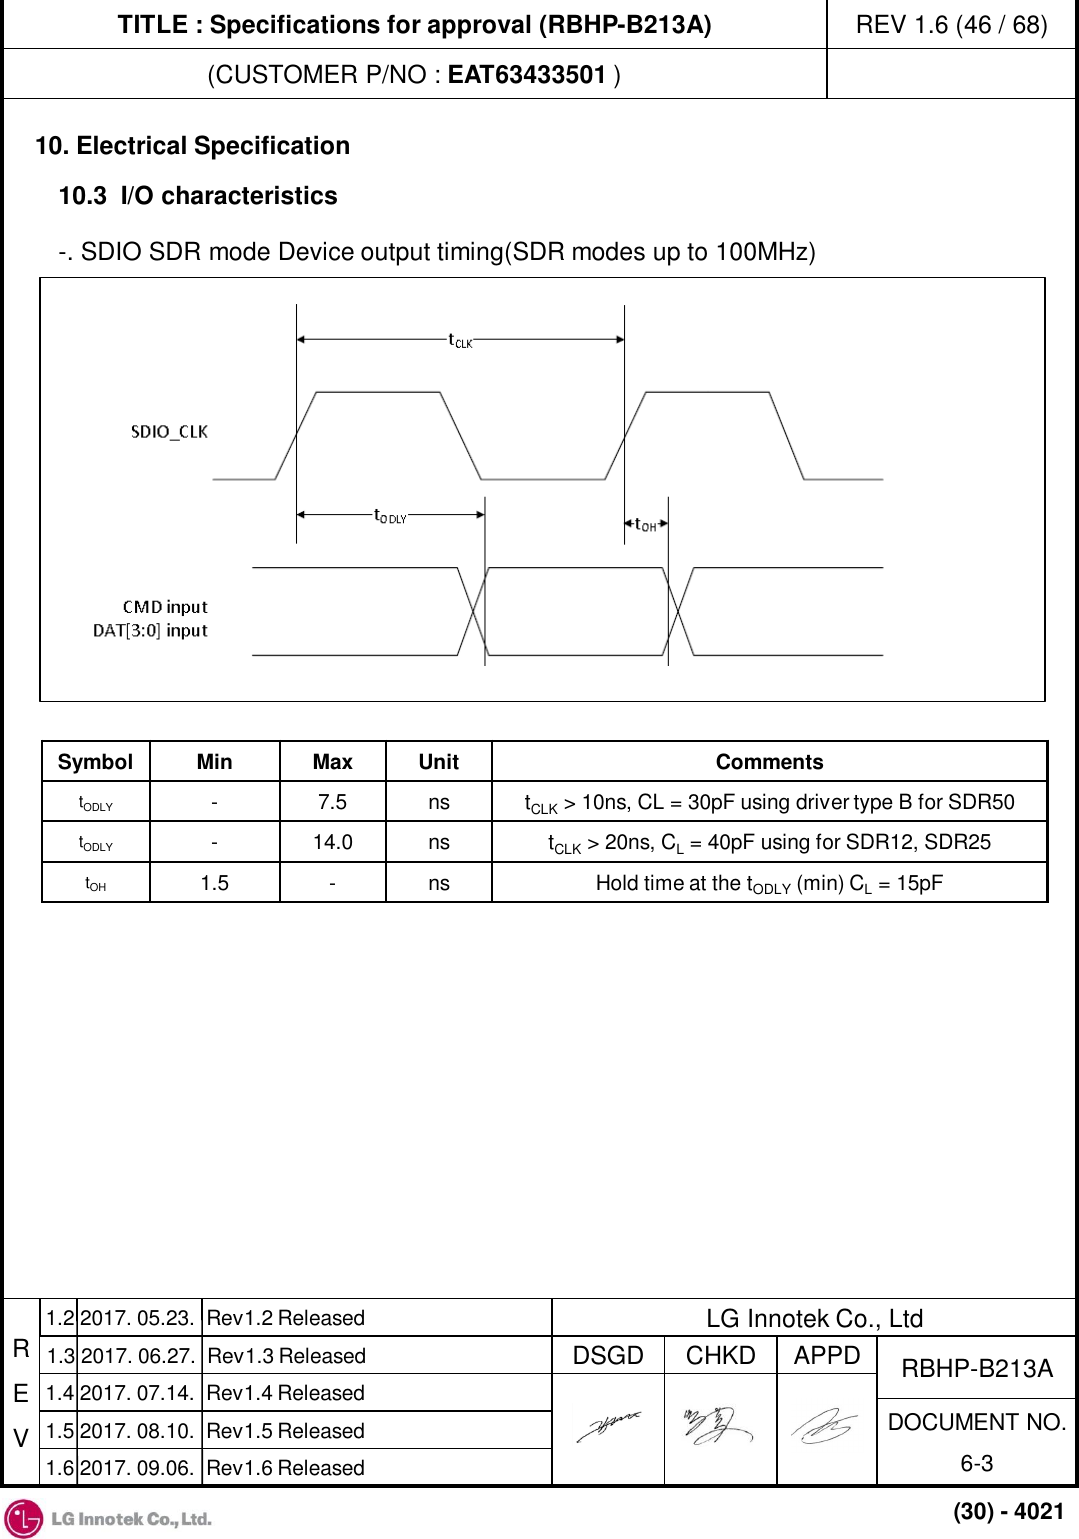 TITLE : Specifications for approval (RBHP-B213A) (CUSTOMER P/NO : EAT63433501 ) REV 1.6 (46 / 68) R E V APPD CHKD DSGD DOCUMENT NO. 6-3 RBHP-B213A LG Innotek Co., Ltd 1.4 2017. 07.14.  Rev1.4 Released 1.5 2017. 08.10.  Rev1.5 Released (30) - 4021 1.2 2017. 05.23.  Rev1.2 Released 1.3 2017. 06.27.  Rev1.3 Released 1.6 2017. 09.06.  Rev1.6 Released 10. Electrical Specification 10.3  I/O characteristics  -. SDIO SDR mode Device output timing(SDR modes up to 100MHz) Symbol  Min  Max  Unit  Comments tODLY  -  7.5  ns  tCLK &gt; 10ns, CL = 30pF using driver type B for SDR50 tODLY  -  14.0  ns  tCLK &gt; 20ns, CL = 40pF using for SDR12, SDR25 tOH 1.5  -  ns  Hold time at the tODLY (min) CL = 15pF 